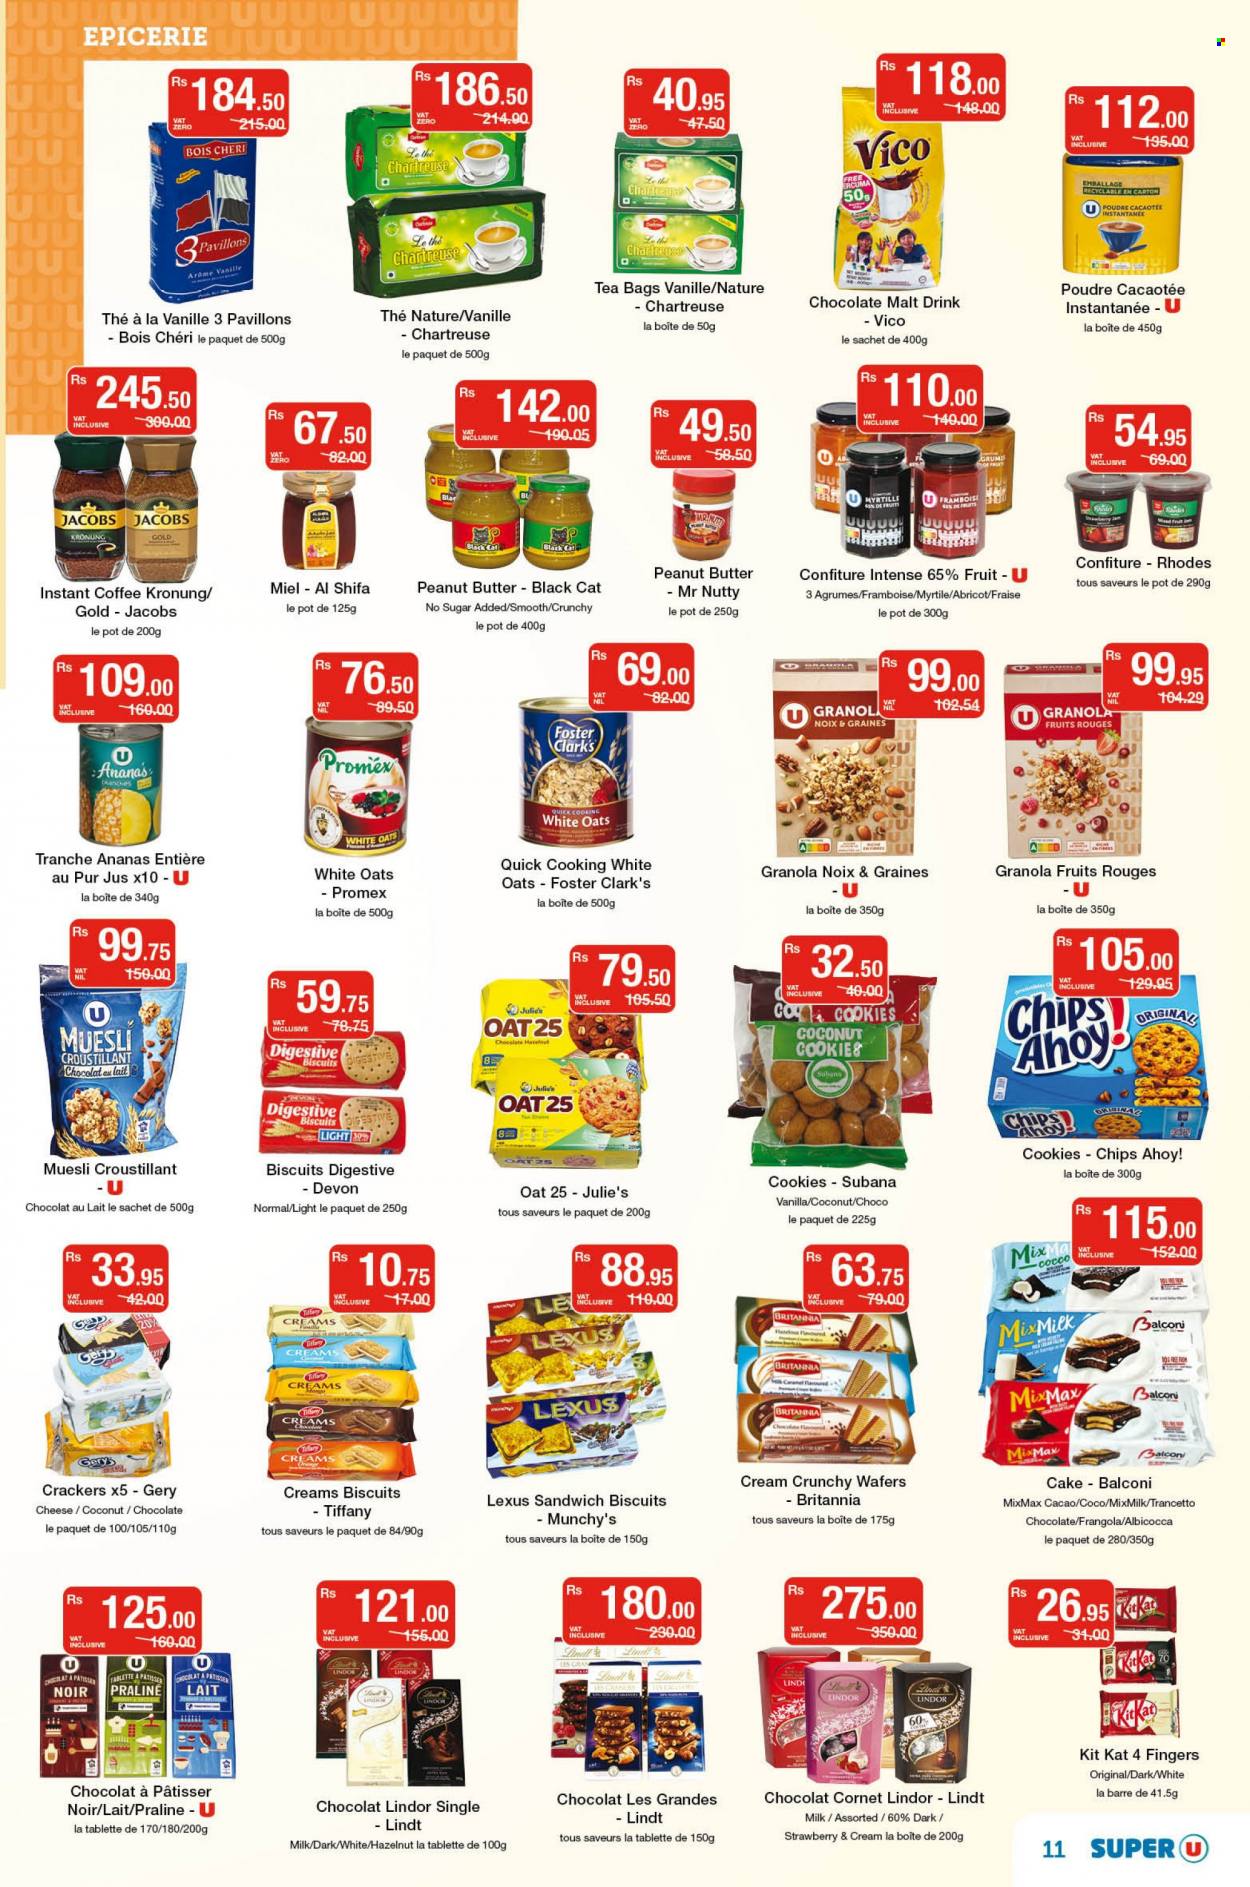 Super U Catalogue - 8.10.2022 - 24.10.2022 - Sales products - cake, sandwich, cheese, cookies, wafers, KitKat, crackers, biscuit, coconut cookies, Julie's, Digestive, Chips Ahoy!, chips, oats, strawberry jam, muesli, jam, peanut butter, tea bags, instant coffee, Jacobs, Jacobs Krönung, pot, granola, Lindt, Lindor, nougat. Page 11.